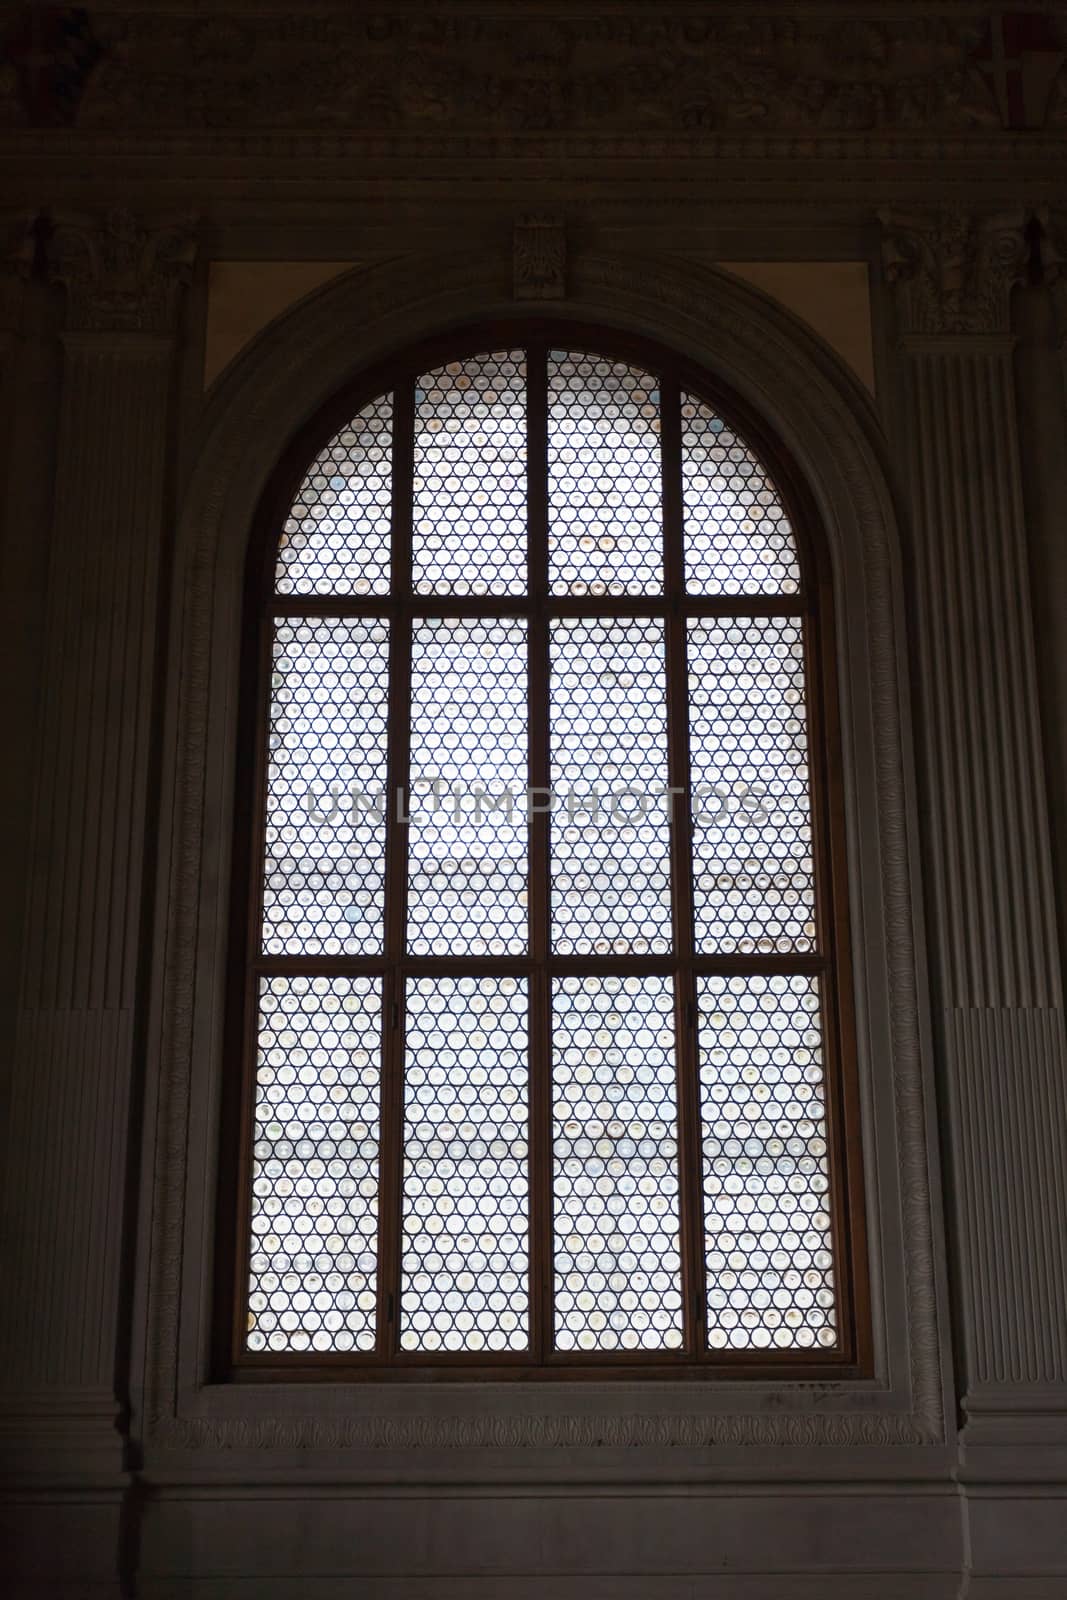 Detail of a window with pattern of circles